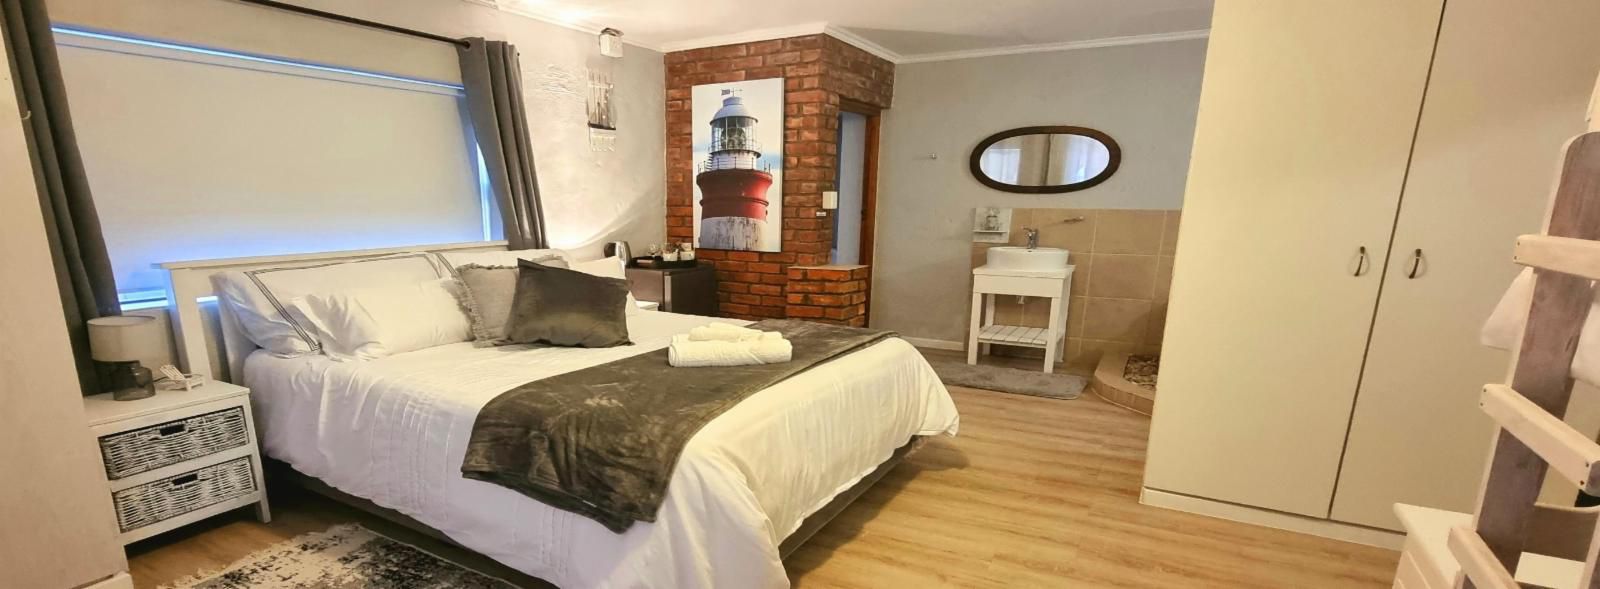 Dances With Waves Struisbaai Western Cape South Africa Bedroom, Brick Texture, Texture